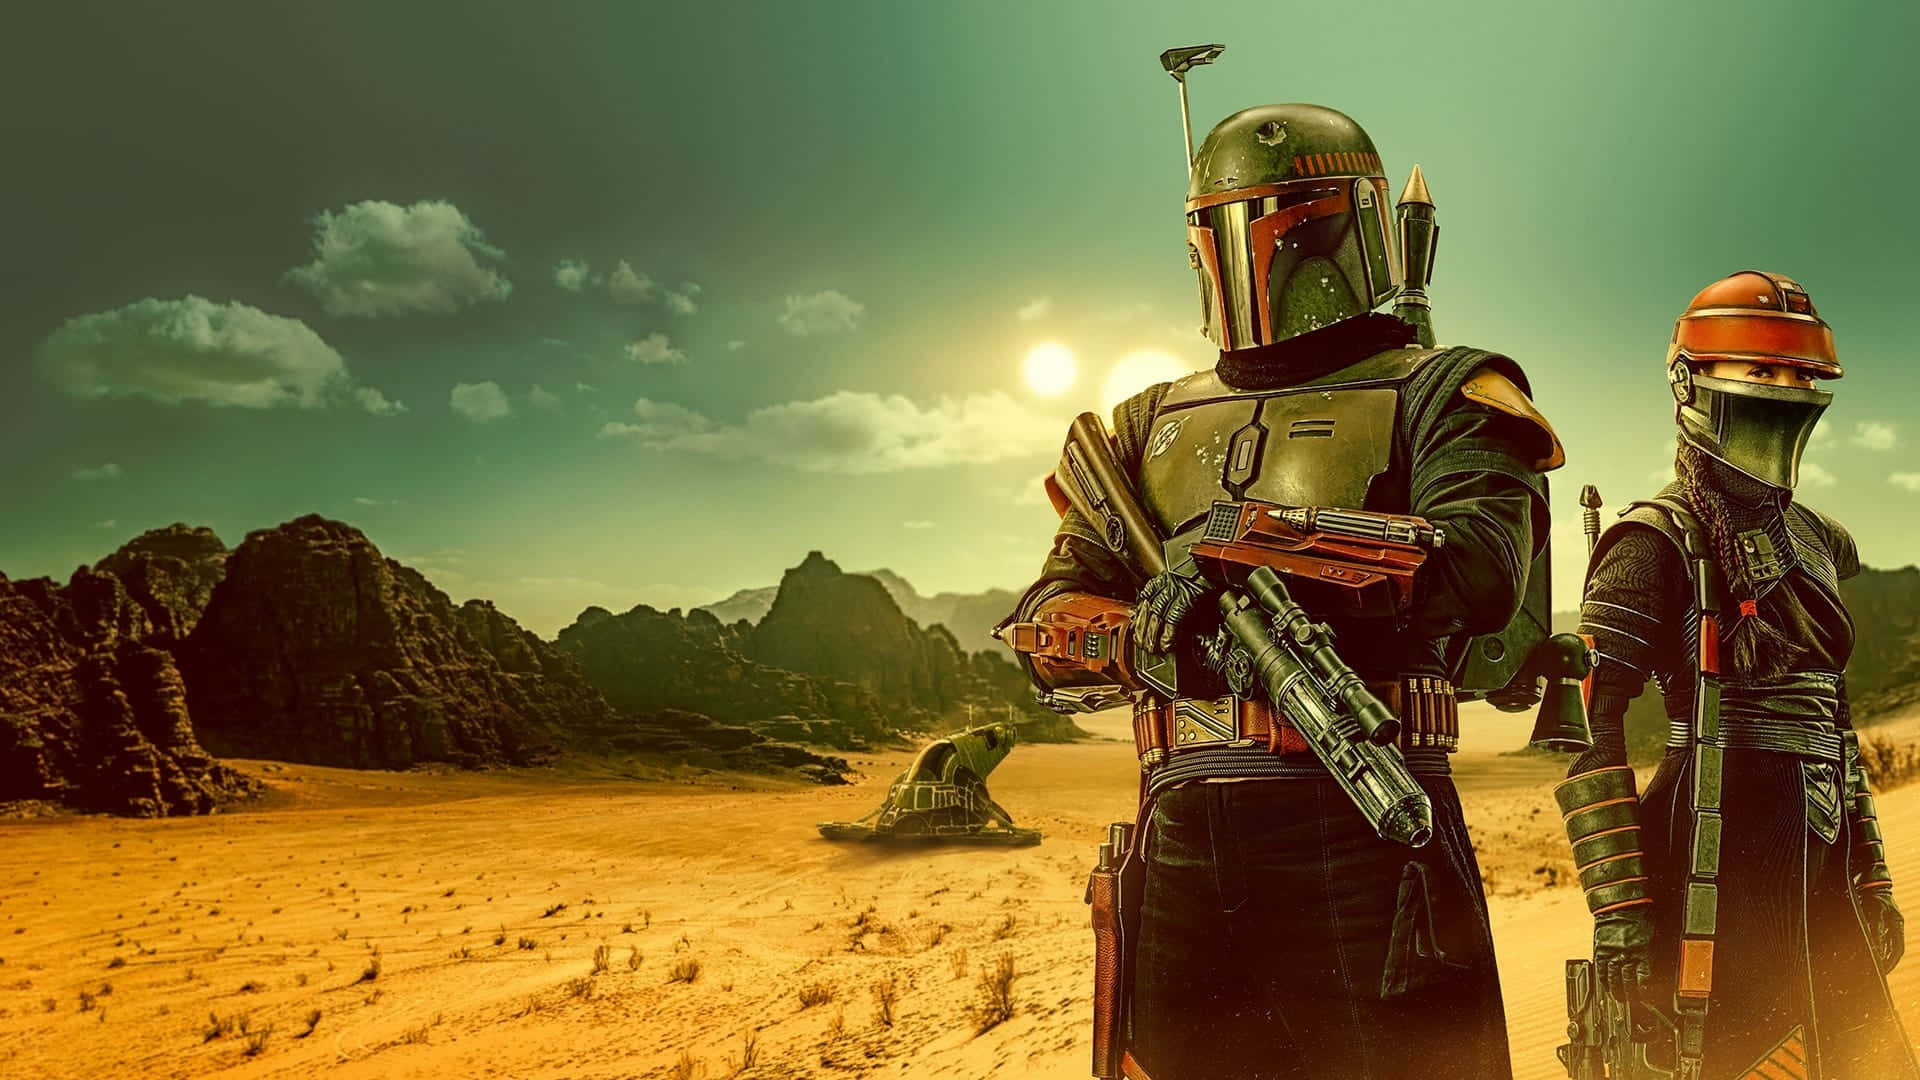 Legendary bounty hunter Boba Fett poses with his iconic armor and weapons in a captivating Star Wars digital art scene.